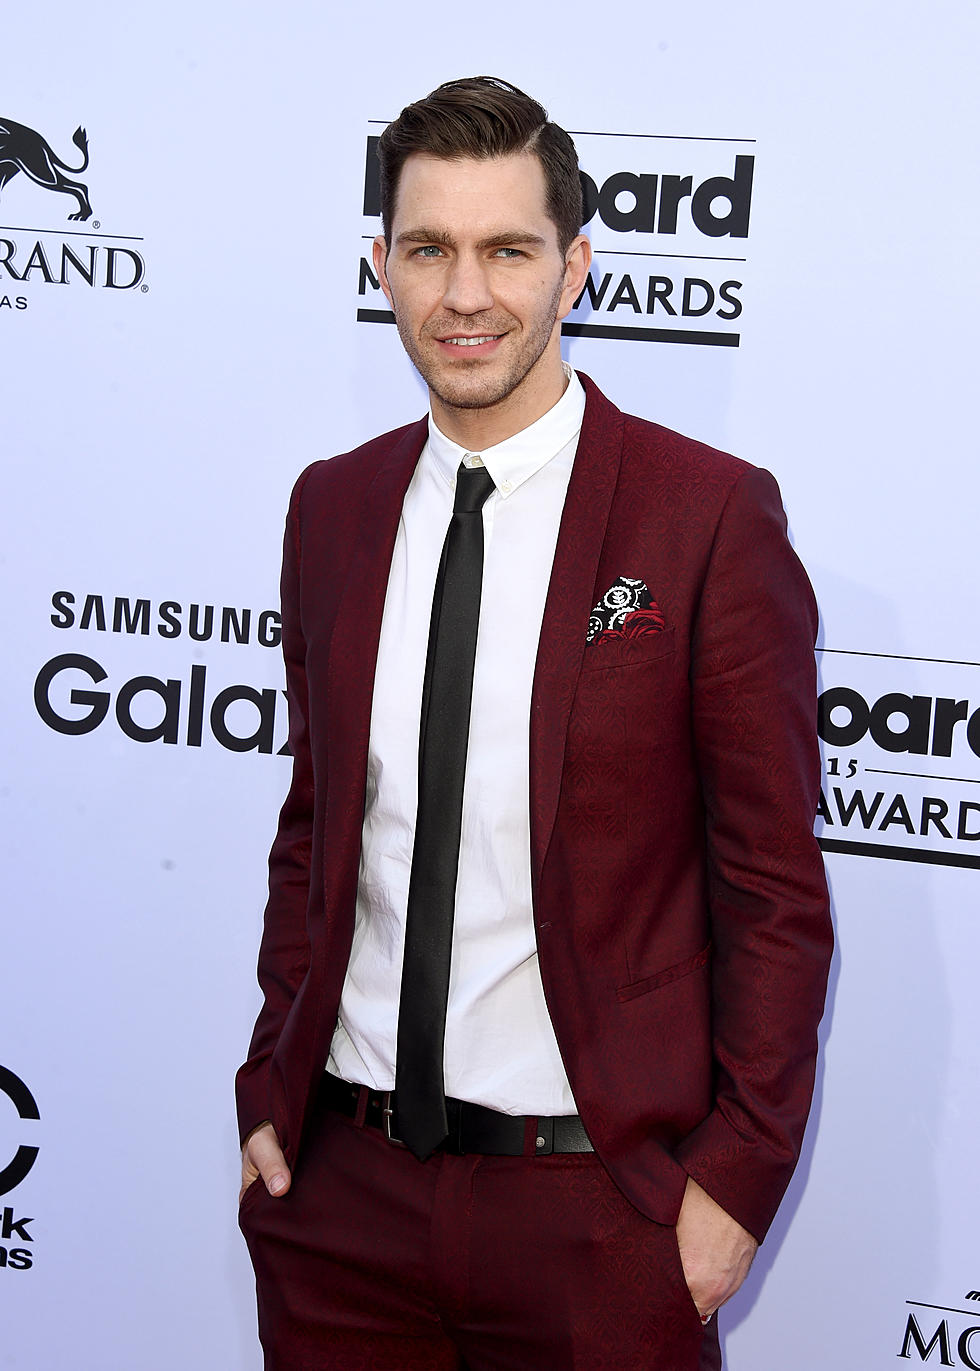 Christine’s Interview with Andy Grammer